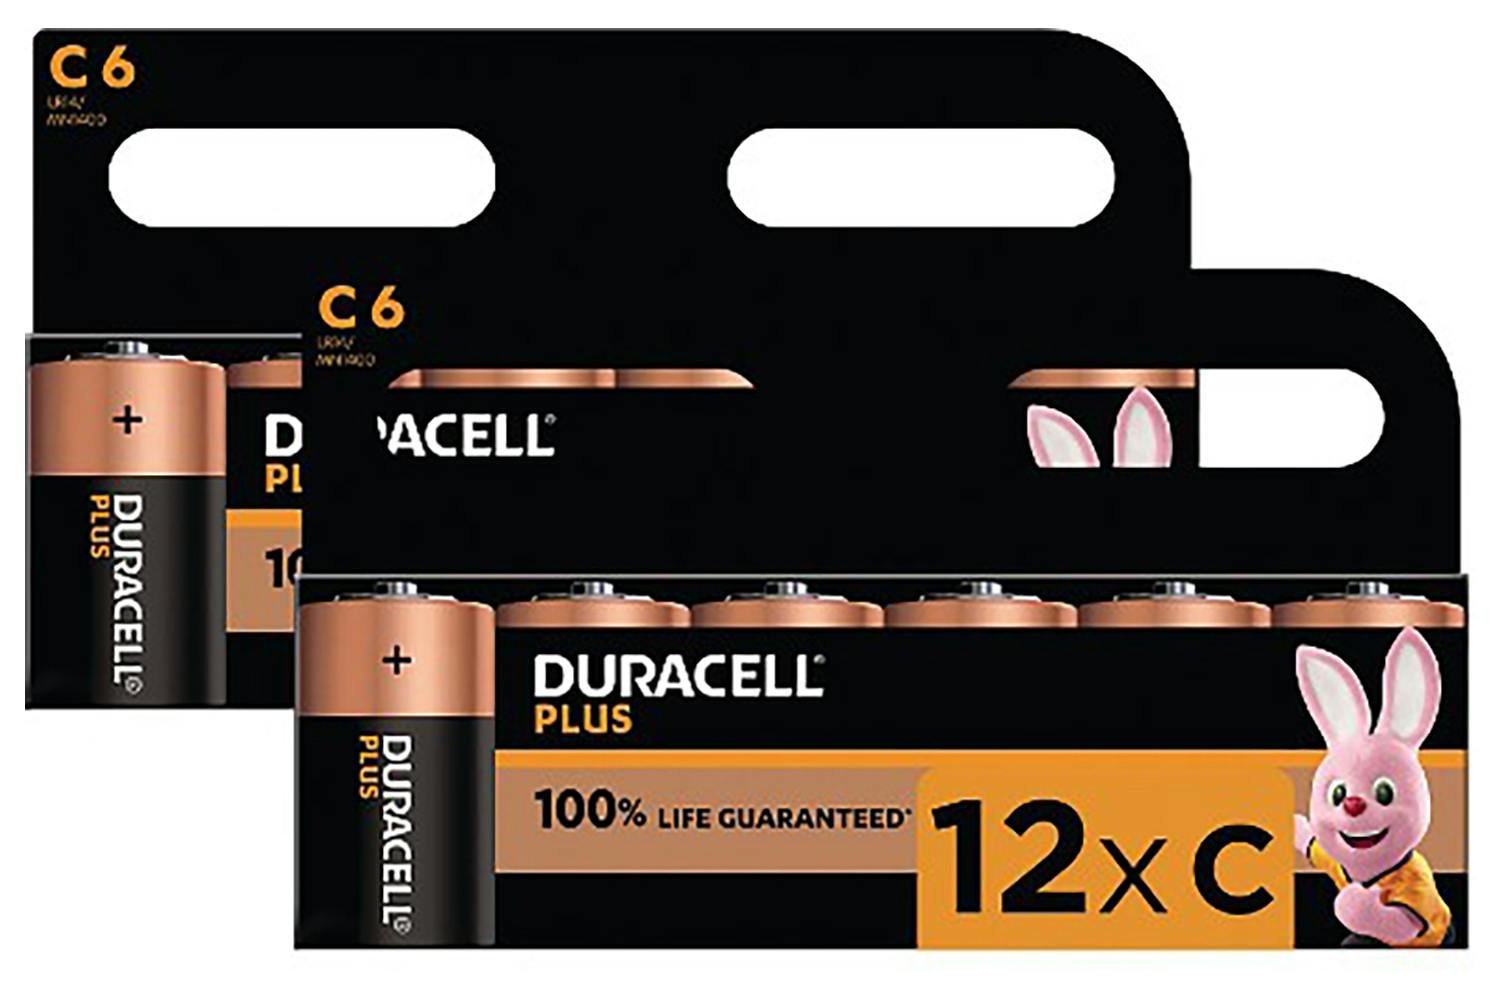 Duracell Plus AAA Batteries (8 Pack) - Alkaline 1.5V - Up To 100